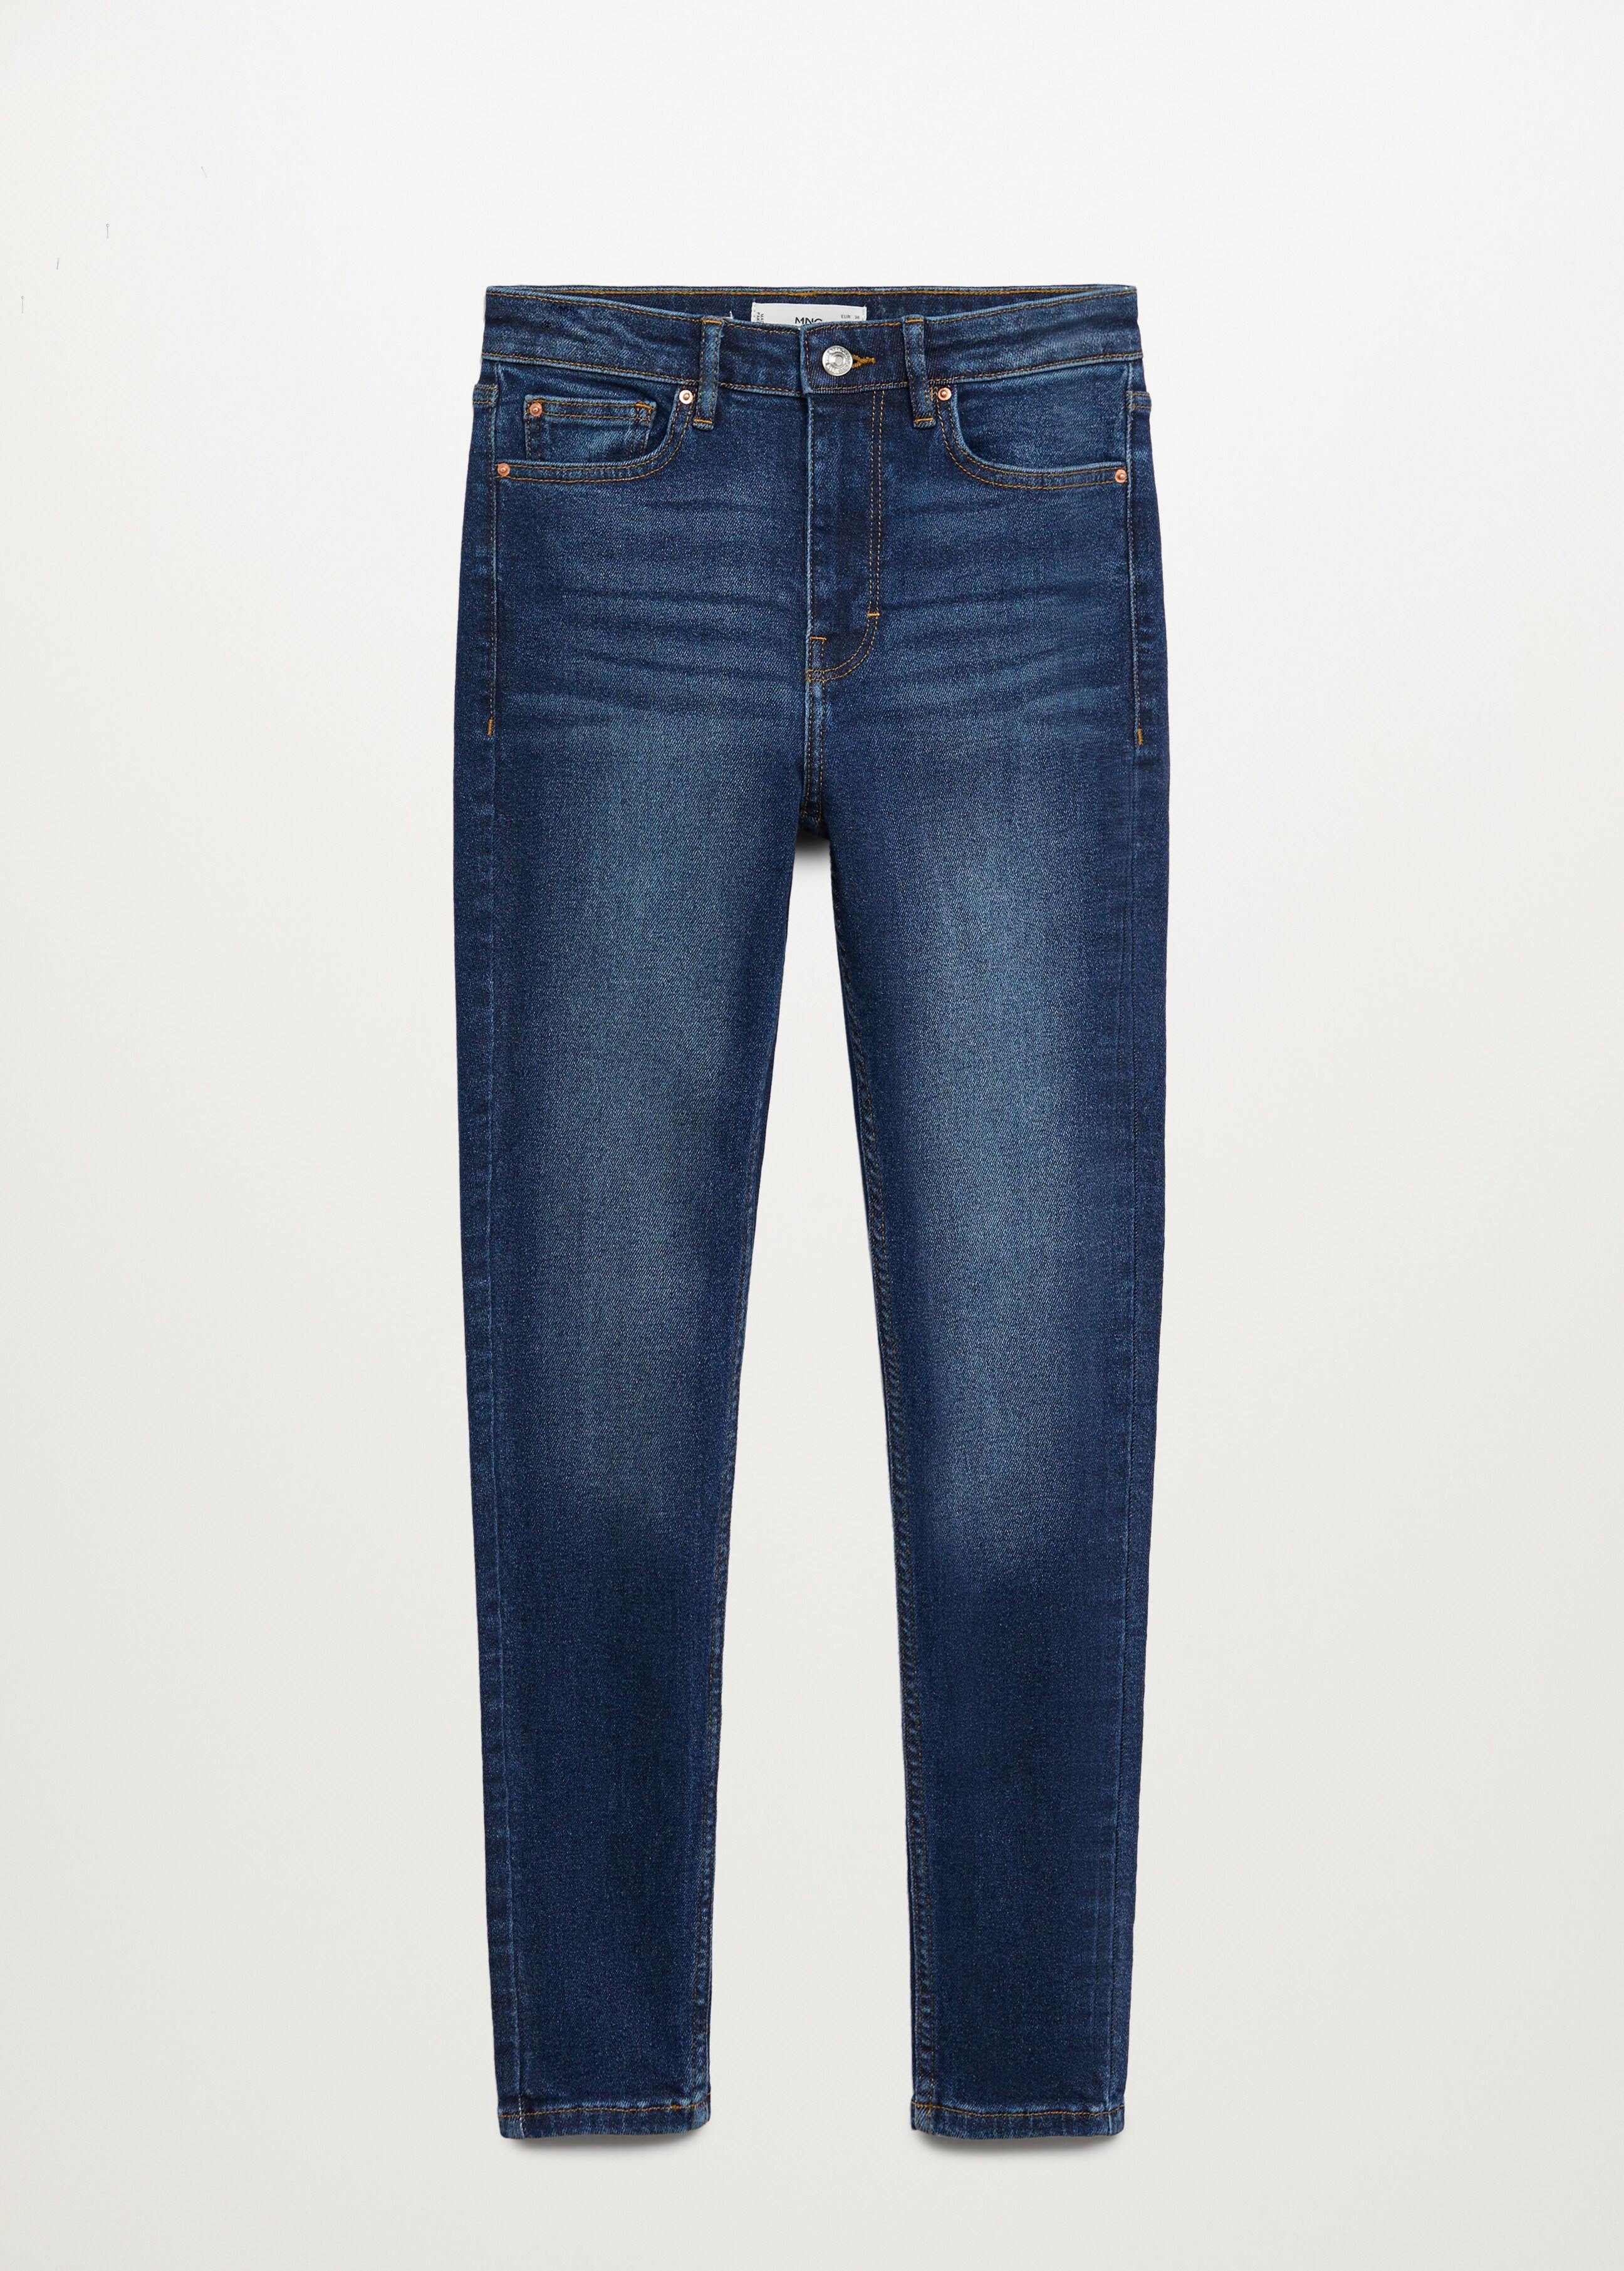 Soho high-waist skinny jeans - Article without model